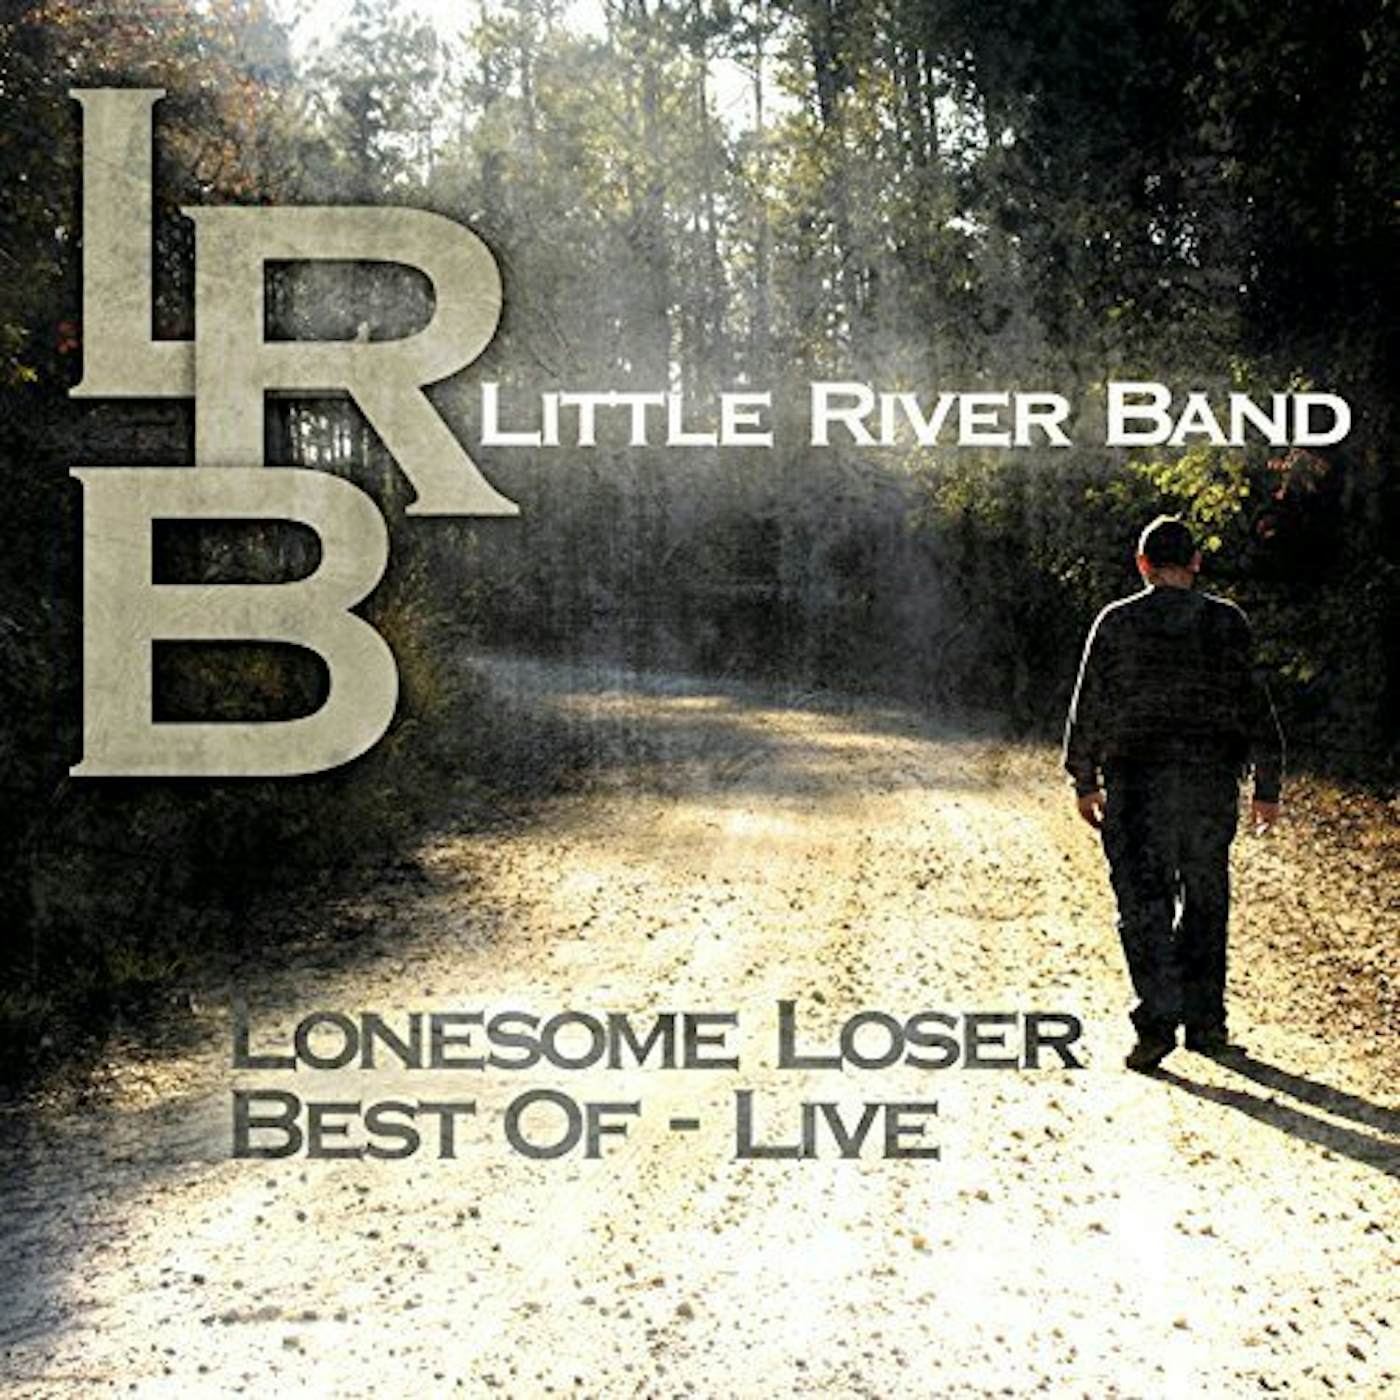 Little River Band LONESOME LOSER - BEST OF LIVE Vinyl Record